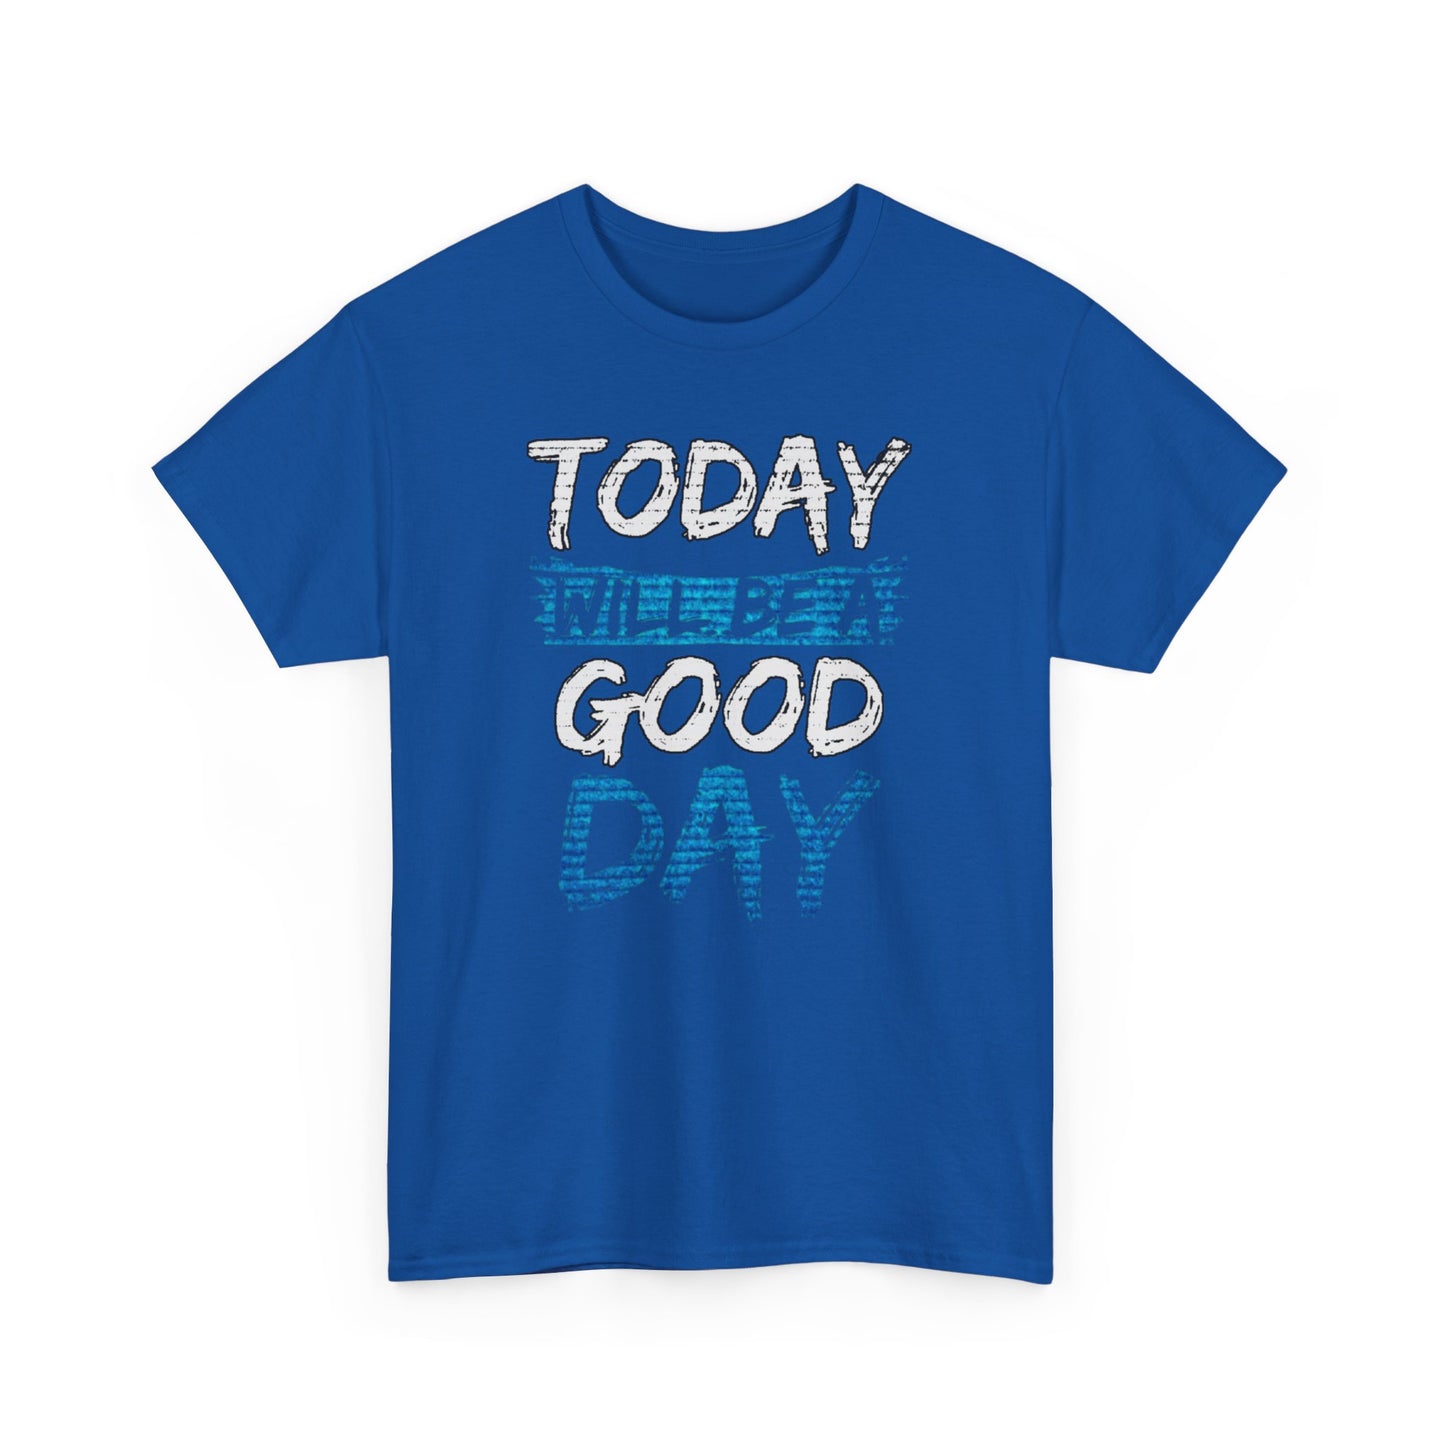 Today Will Be A Good Day High Quality Printed Unisex Heavy Cotton T-shirt